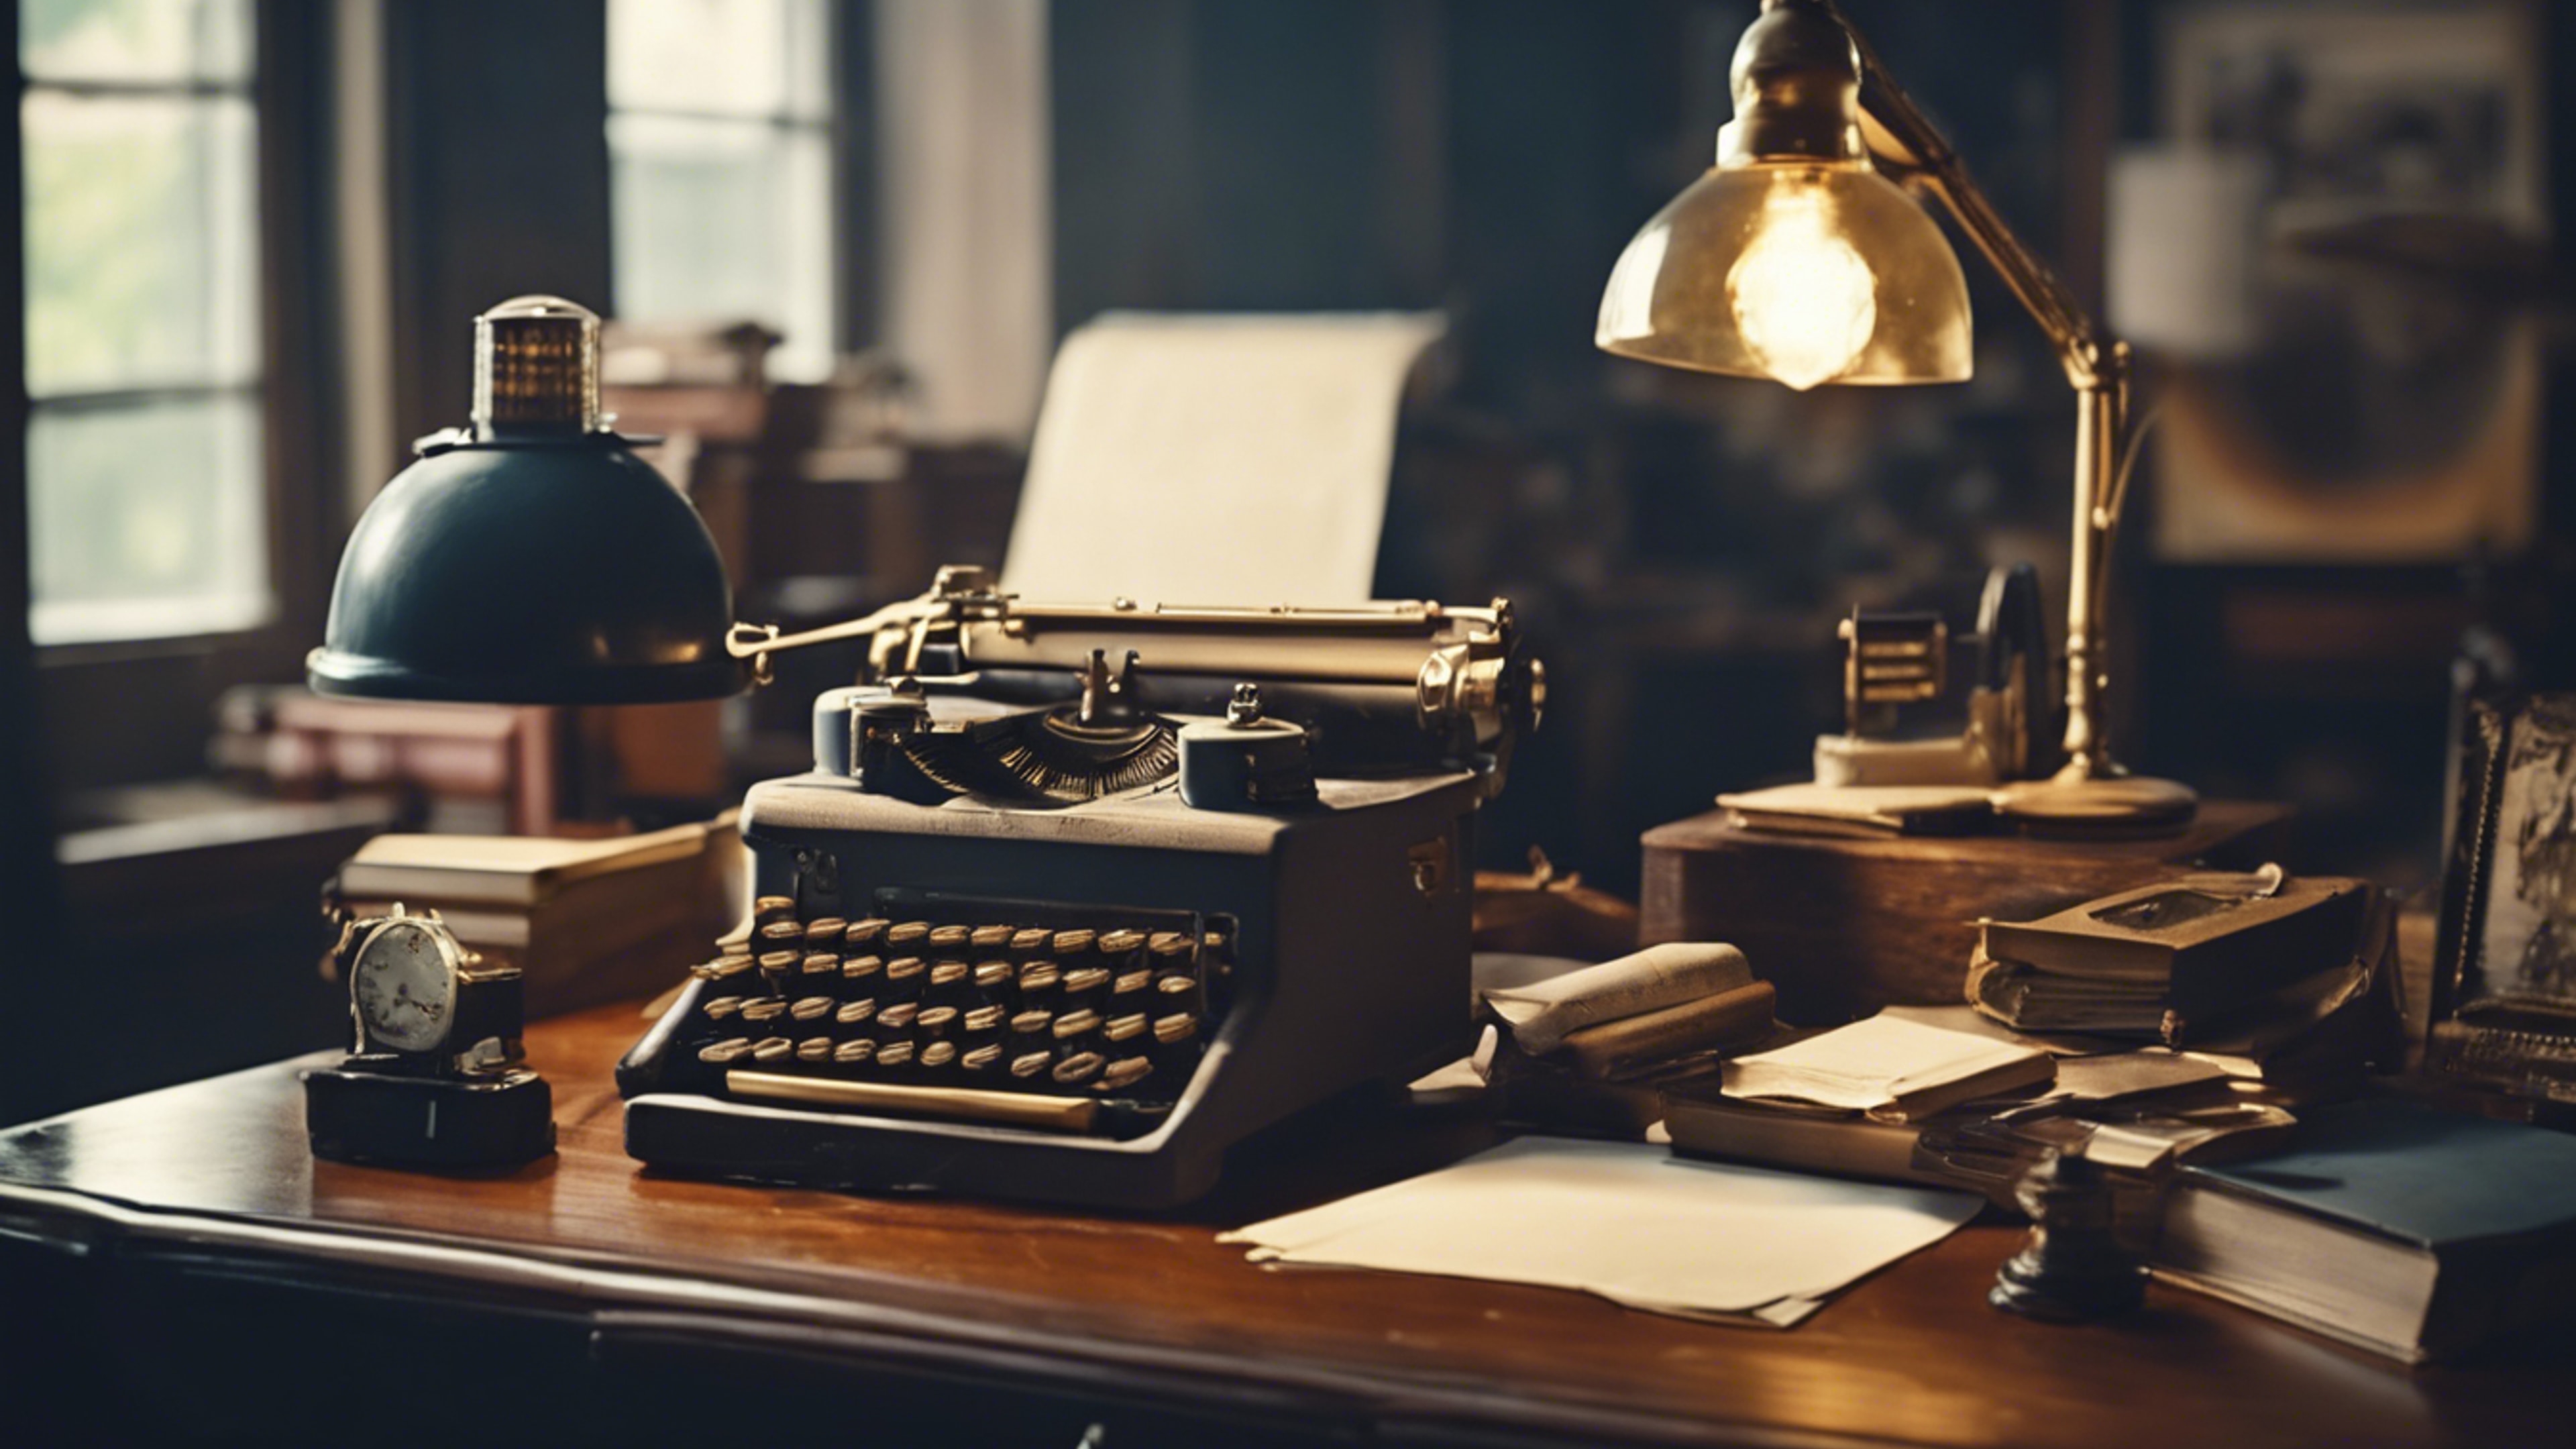 An old-fashioned navy office with a wooden desk, a typwriter and a vintage lamp. Fondo de pantalla[8cb58867731e4823a50e]